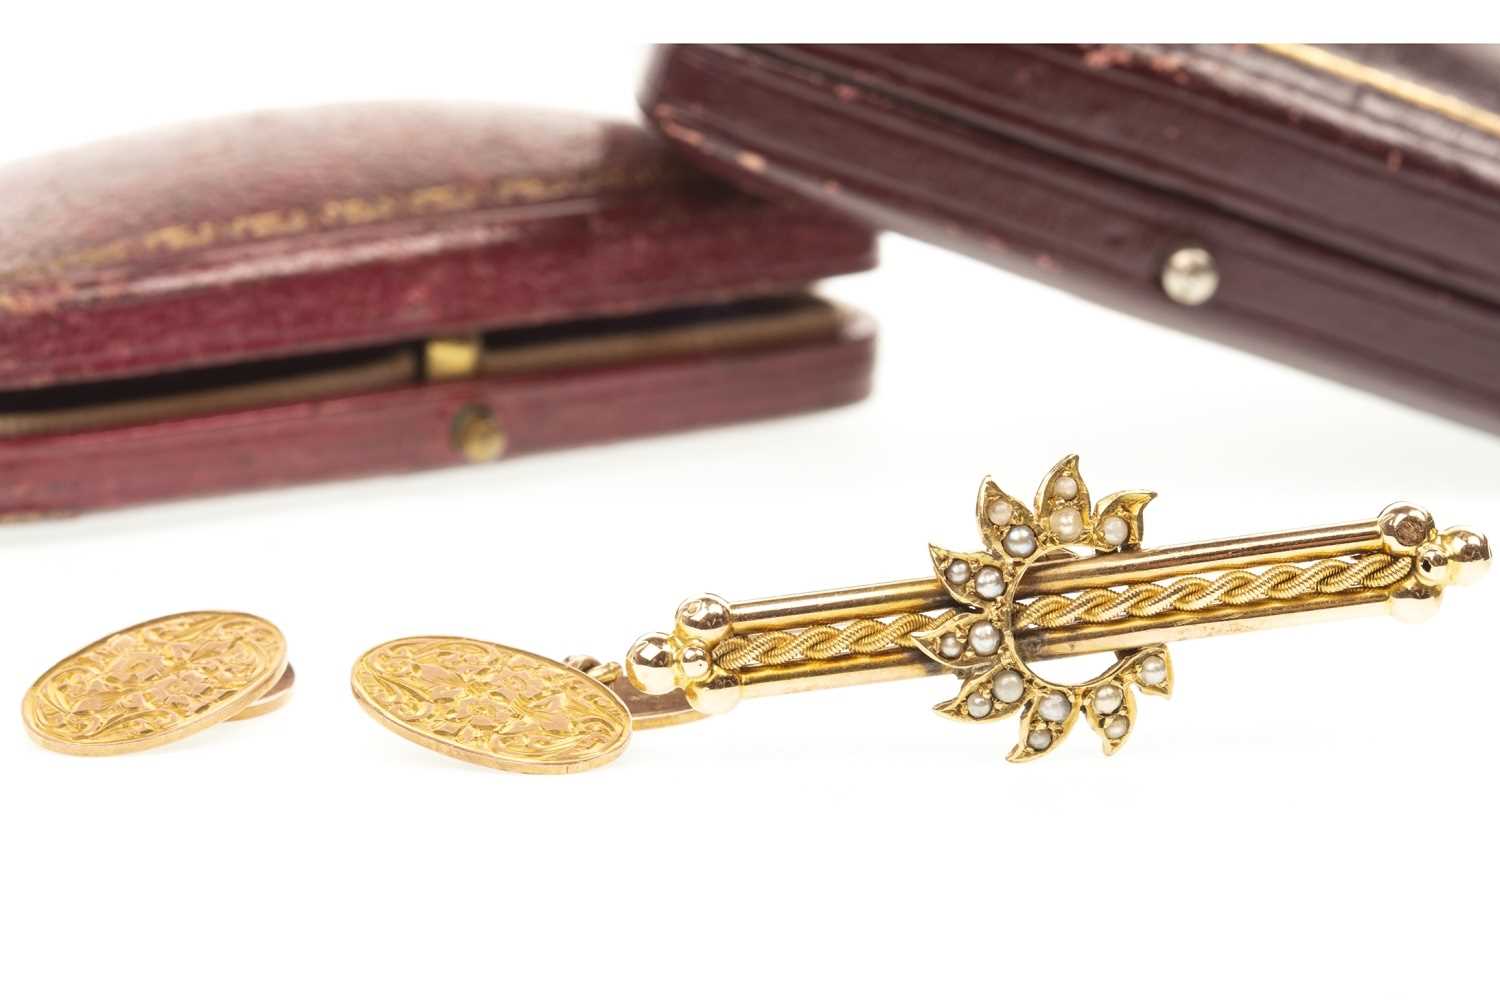 Lot 136 - A SEED PEARL BAR BROOCH AND A PAIR OF CUFFLINKS